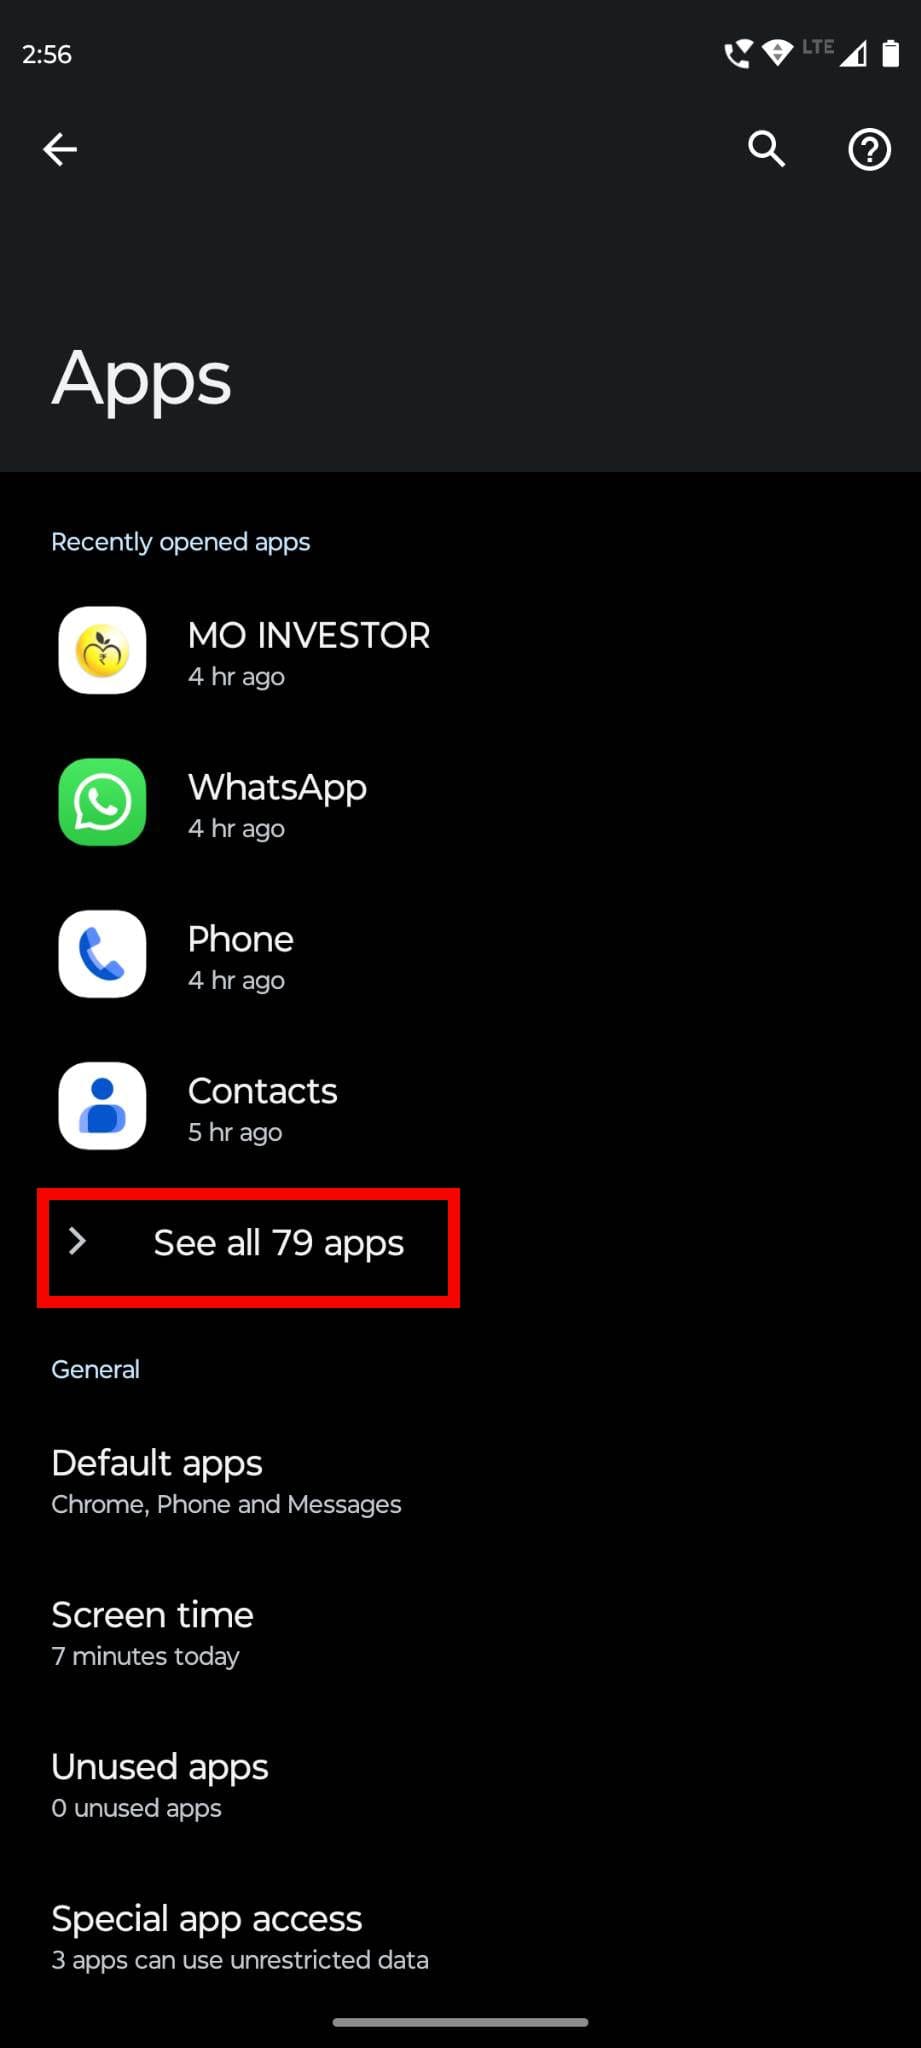 Tap on See all X apps to access all the apps on the phone